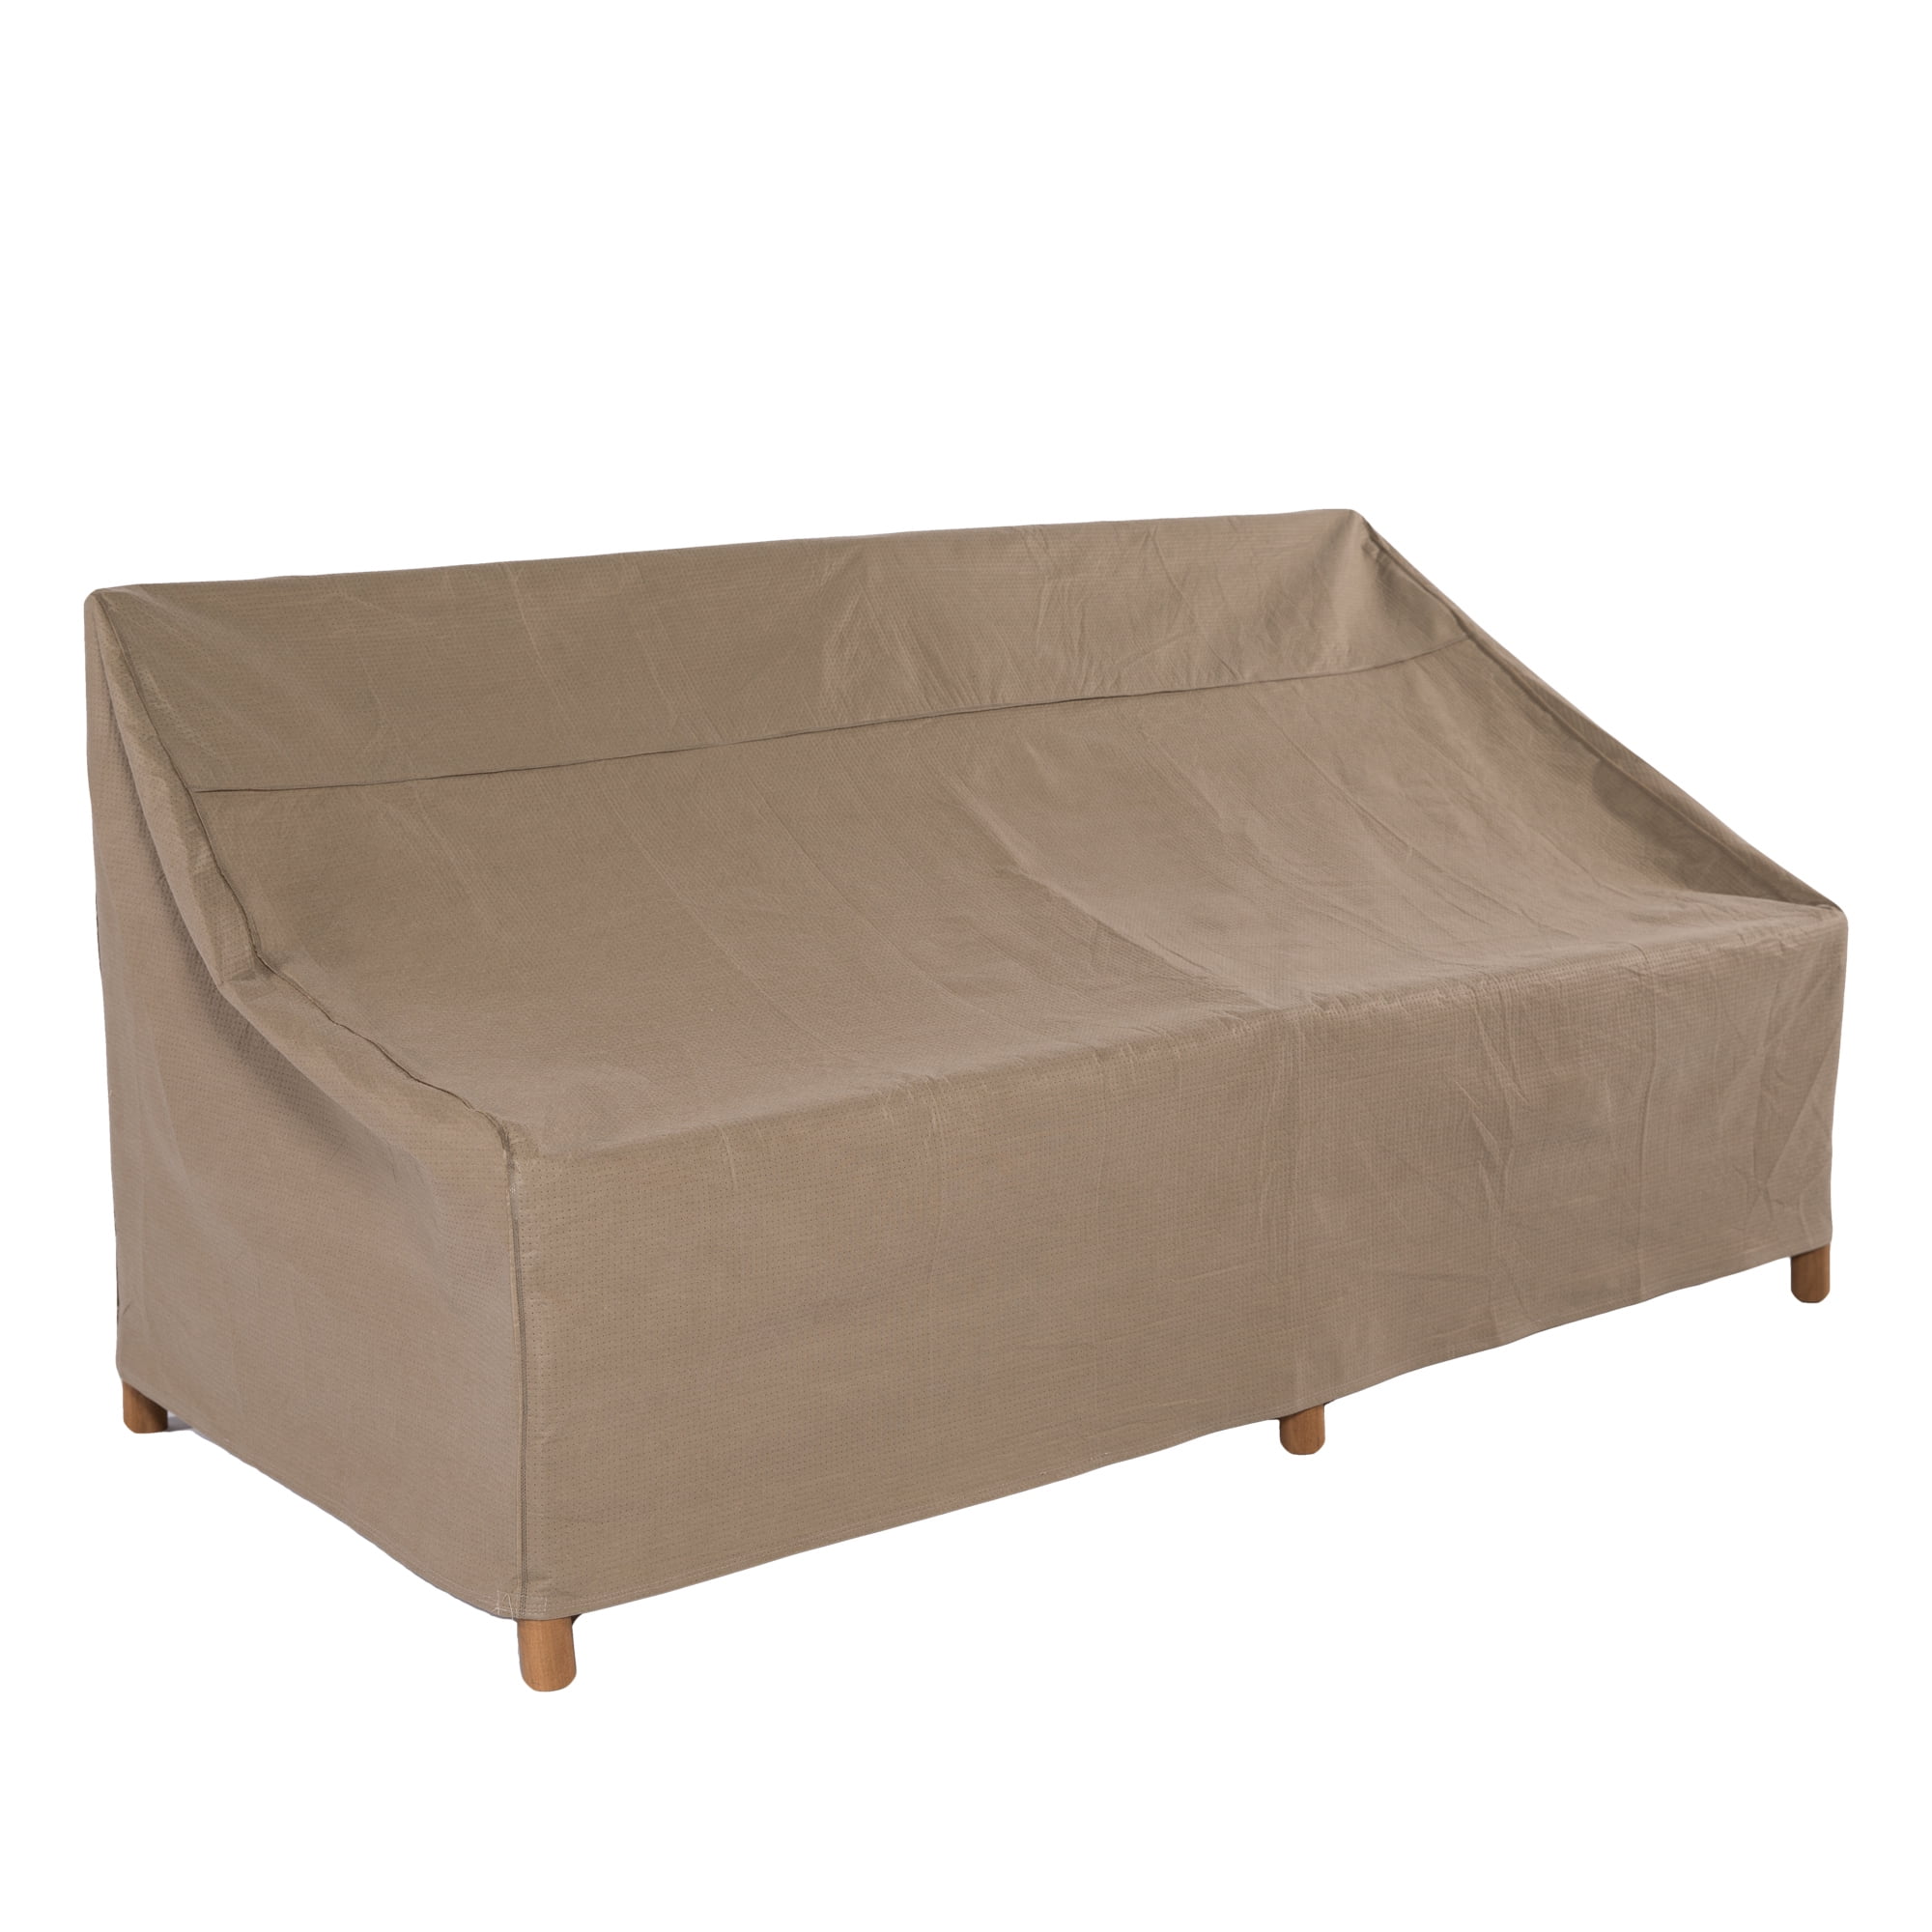 Heavty Duty Outdoor 3-Seater Couch Cover 100% Waterproof Outdoor Patio Furniture Covers with Air Vents Outdoor Patio Sofa Cover 76x40x31 inch 